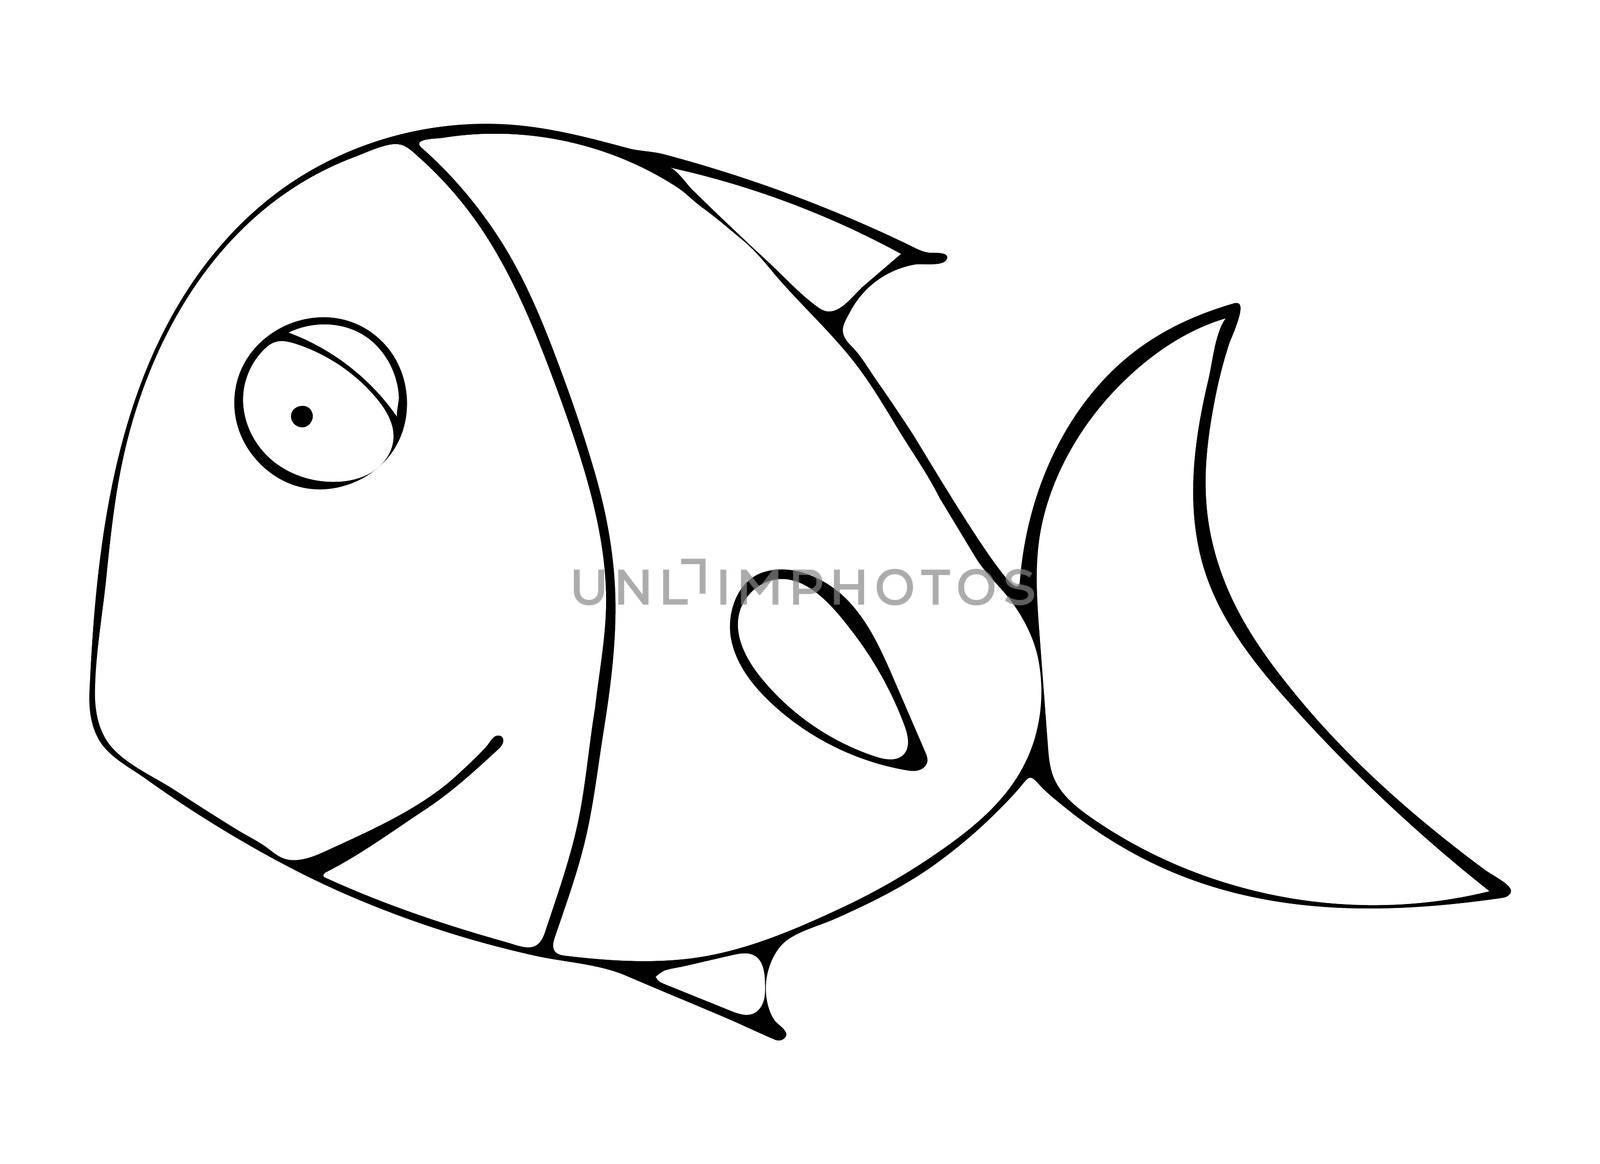 Black and White Fish Coloring Page. Handdrawn Black and White Sea Doodle Sketch Illustration. Fish Coloring Book for Kids.